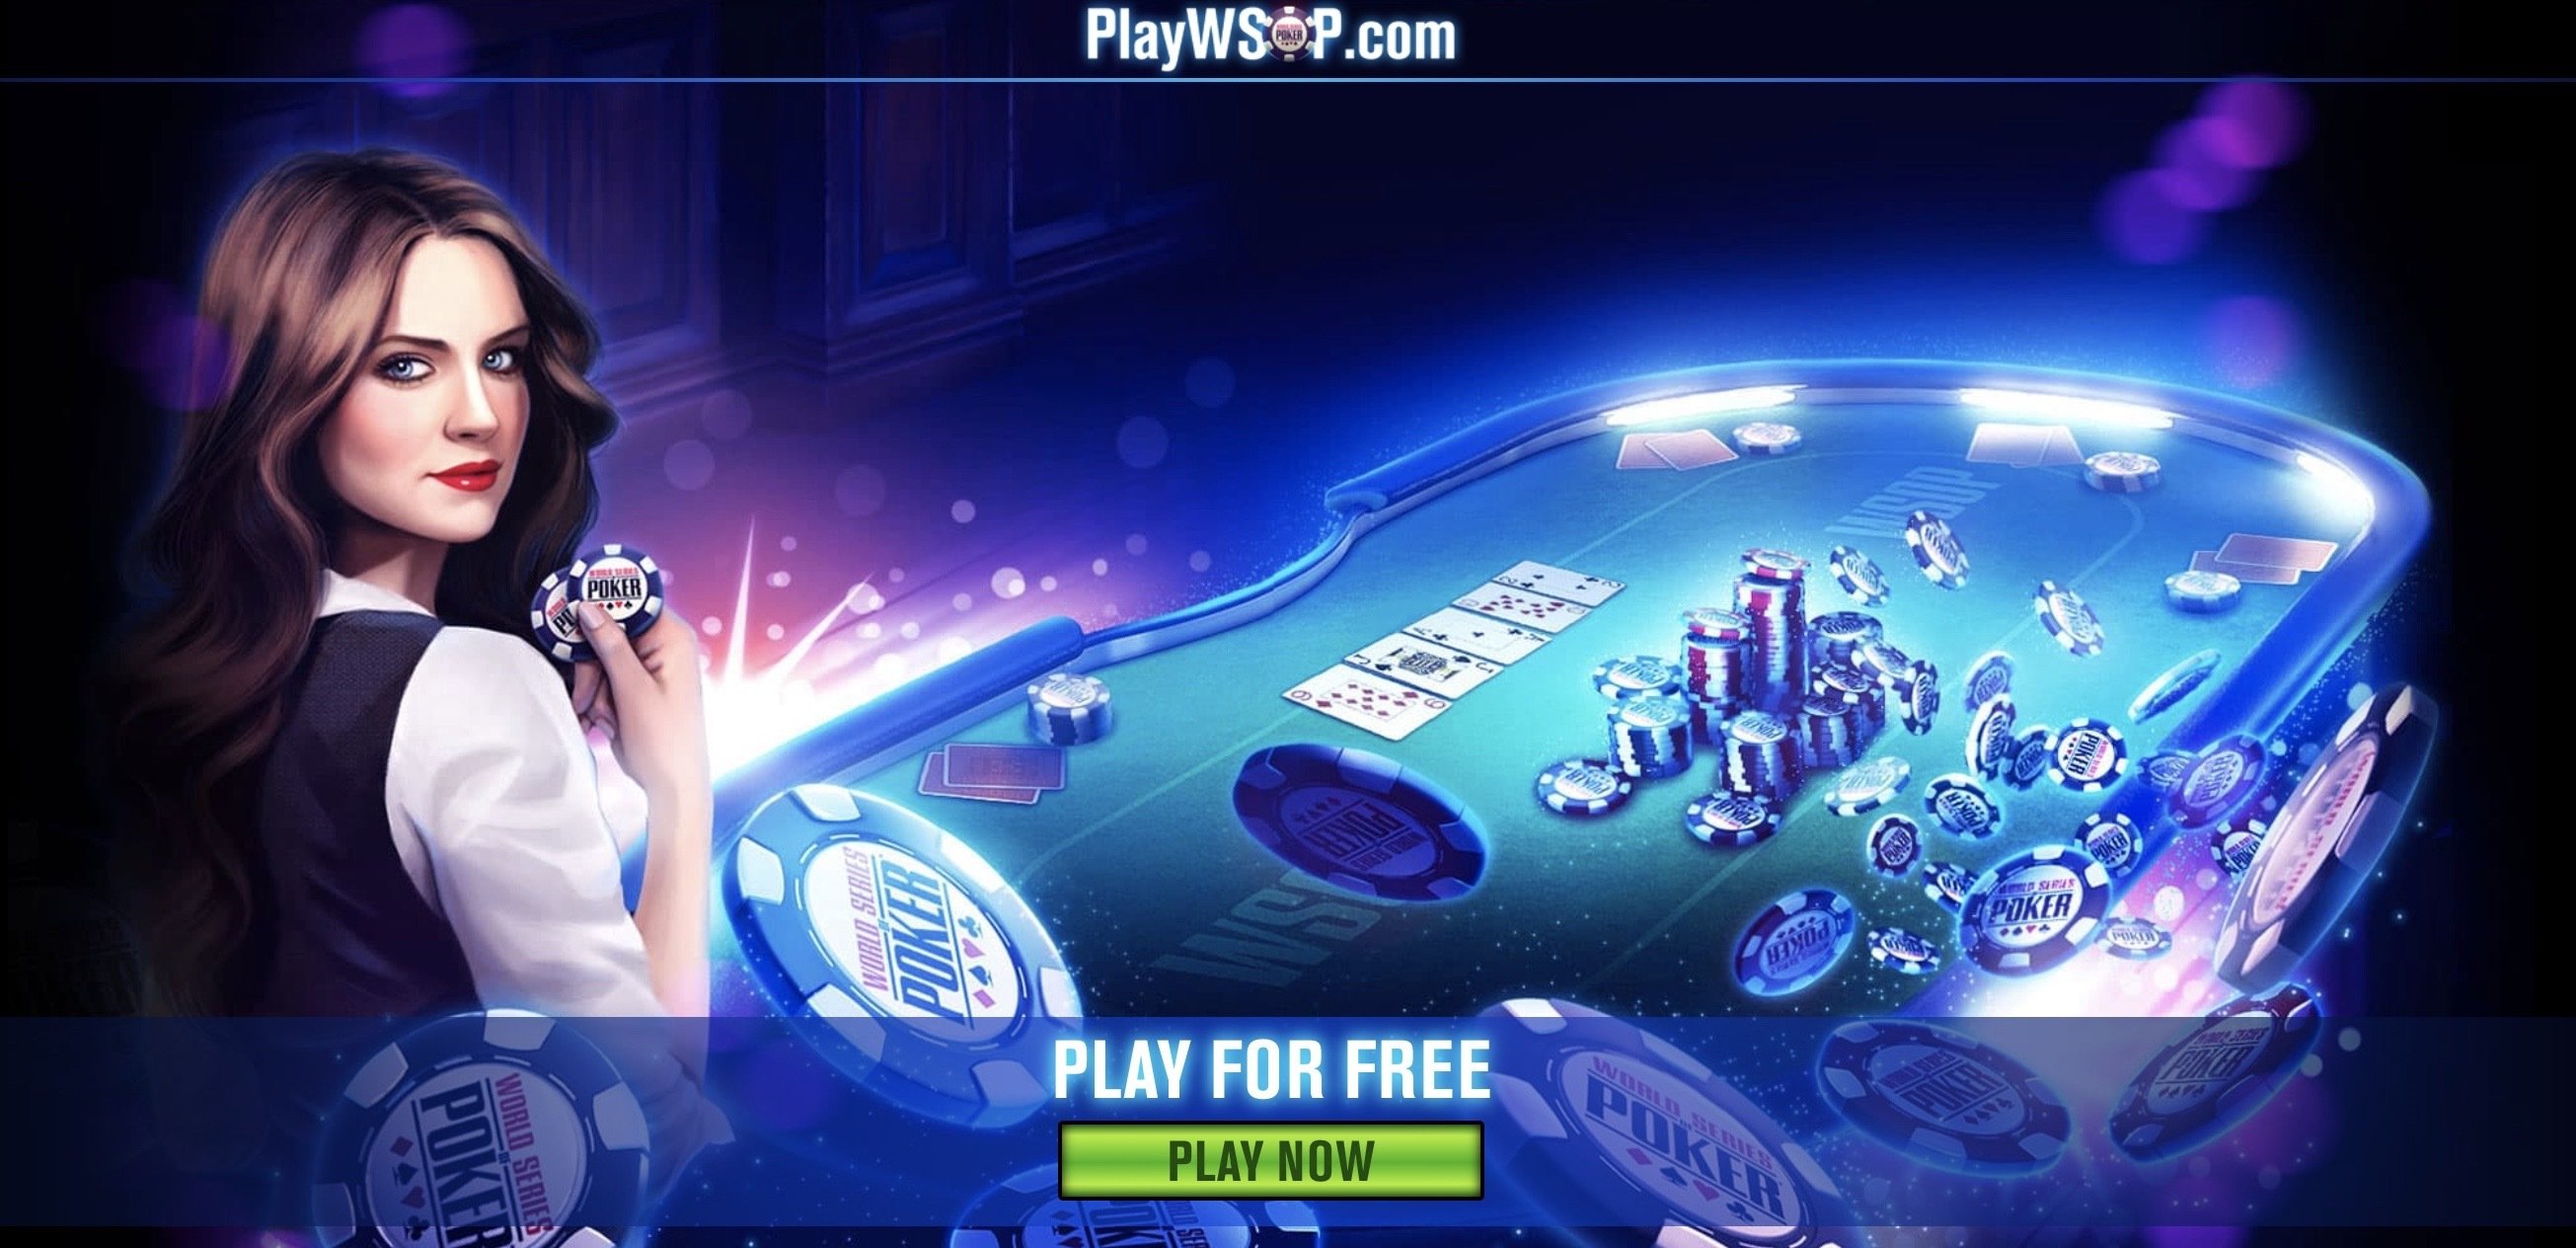 Play Poker for Free (without registration) 